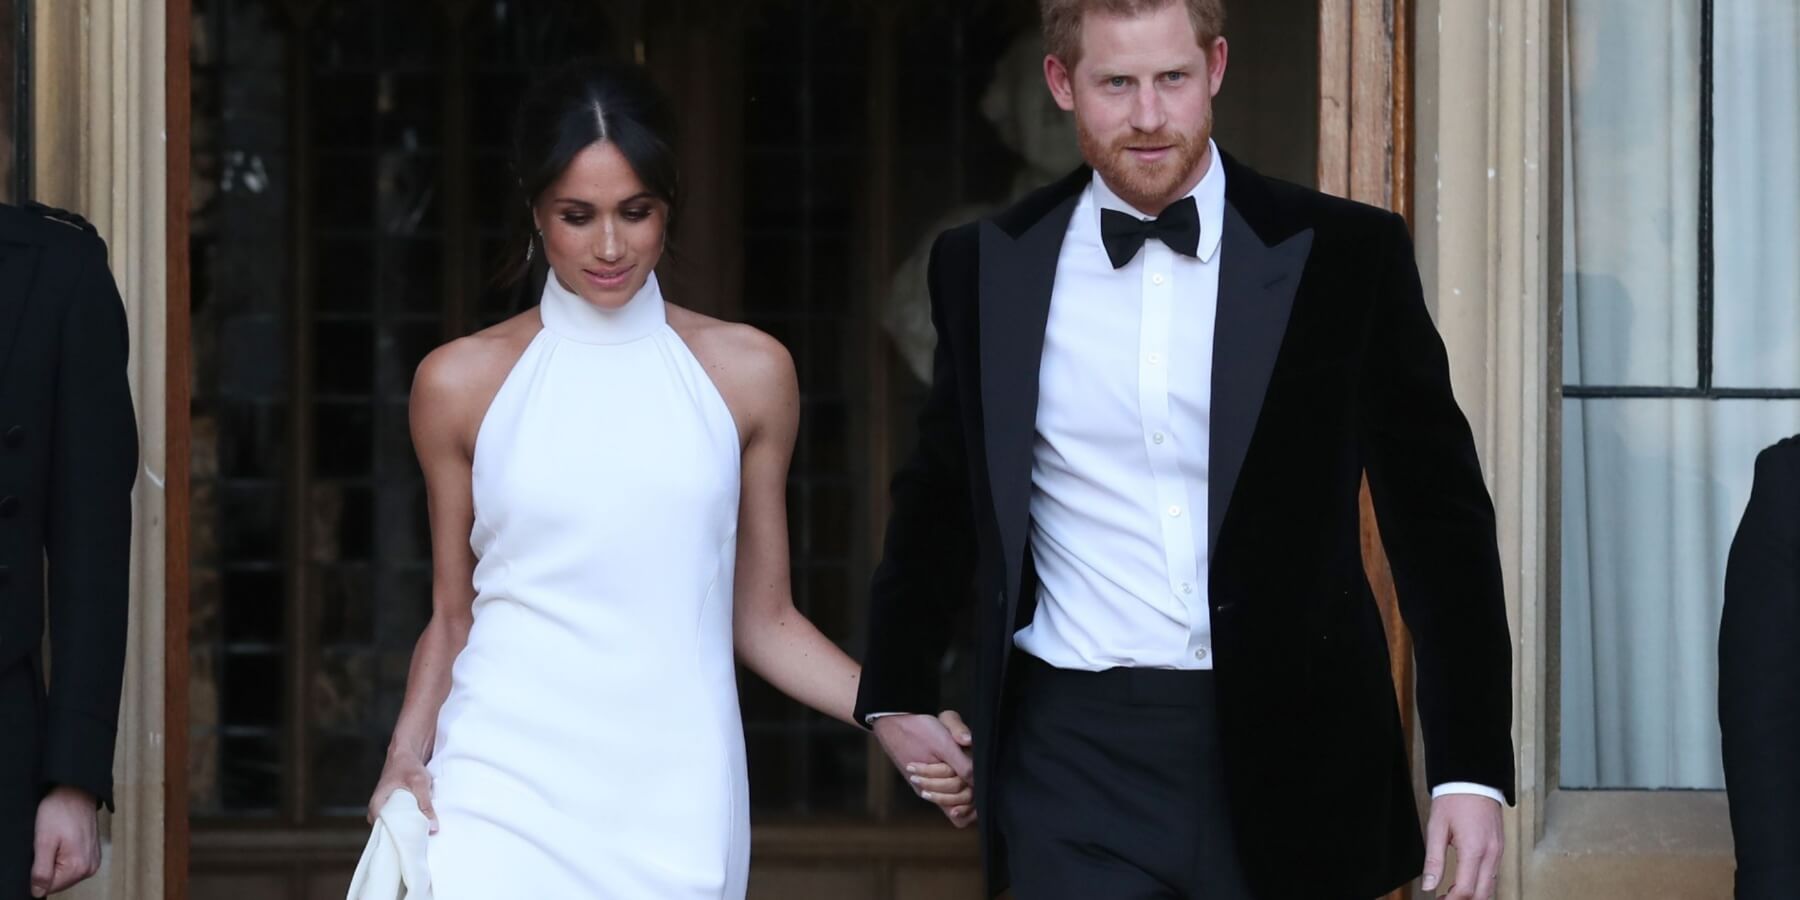 Meghan Markle and Prince Harry as they left Windsor Castle to head to their wedding reception in April 2018,